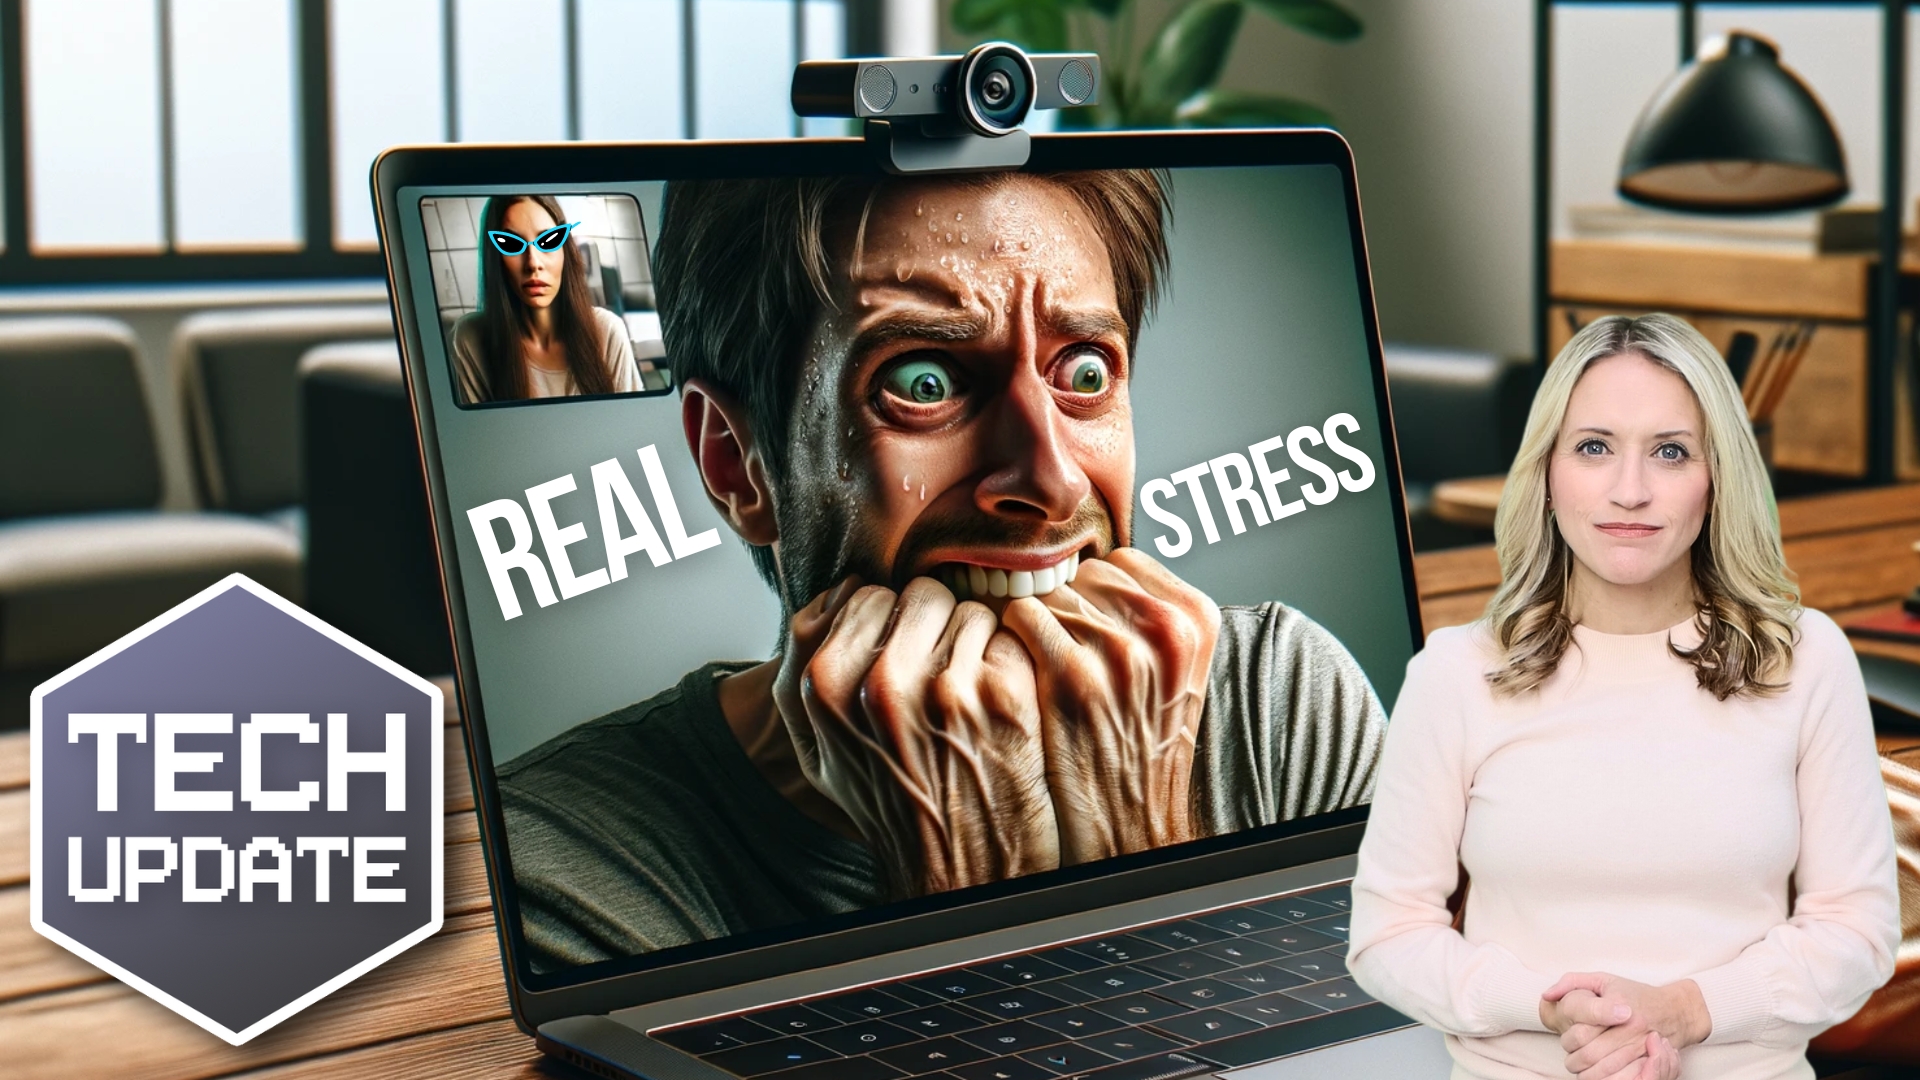 You’re not imagining it, video calls ARE stressful